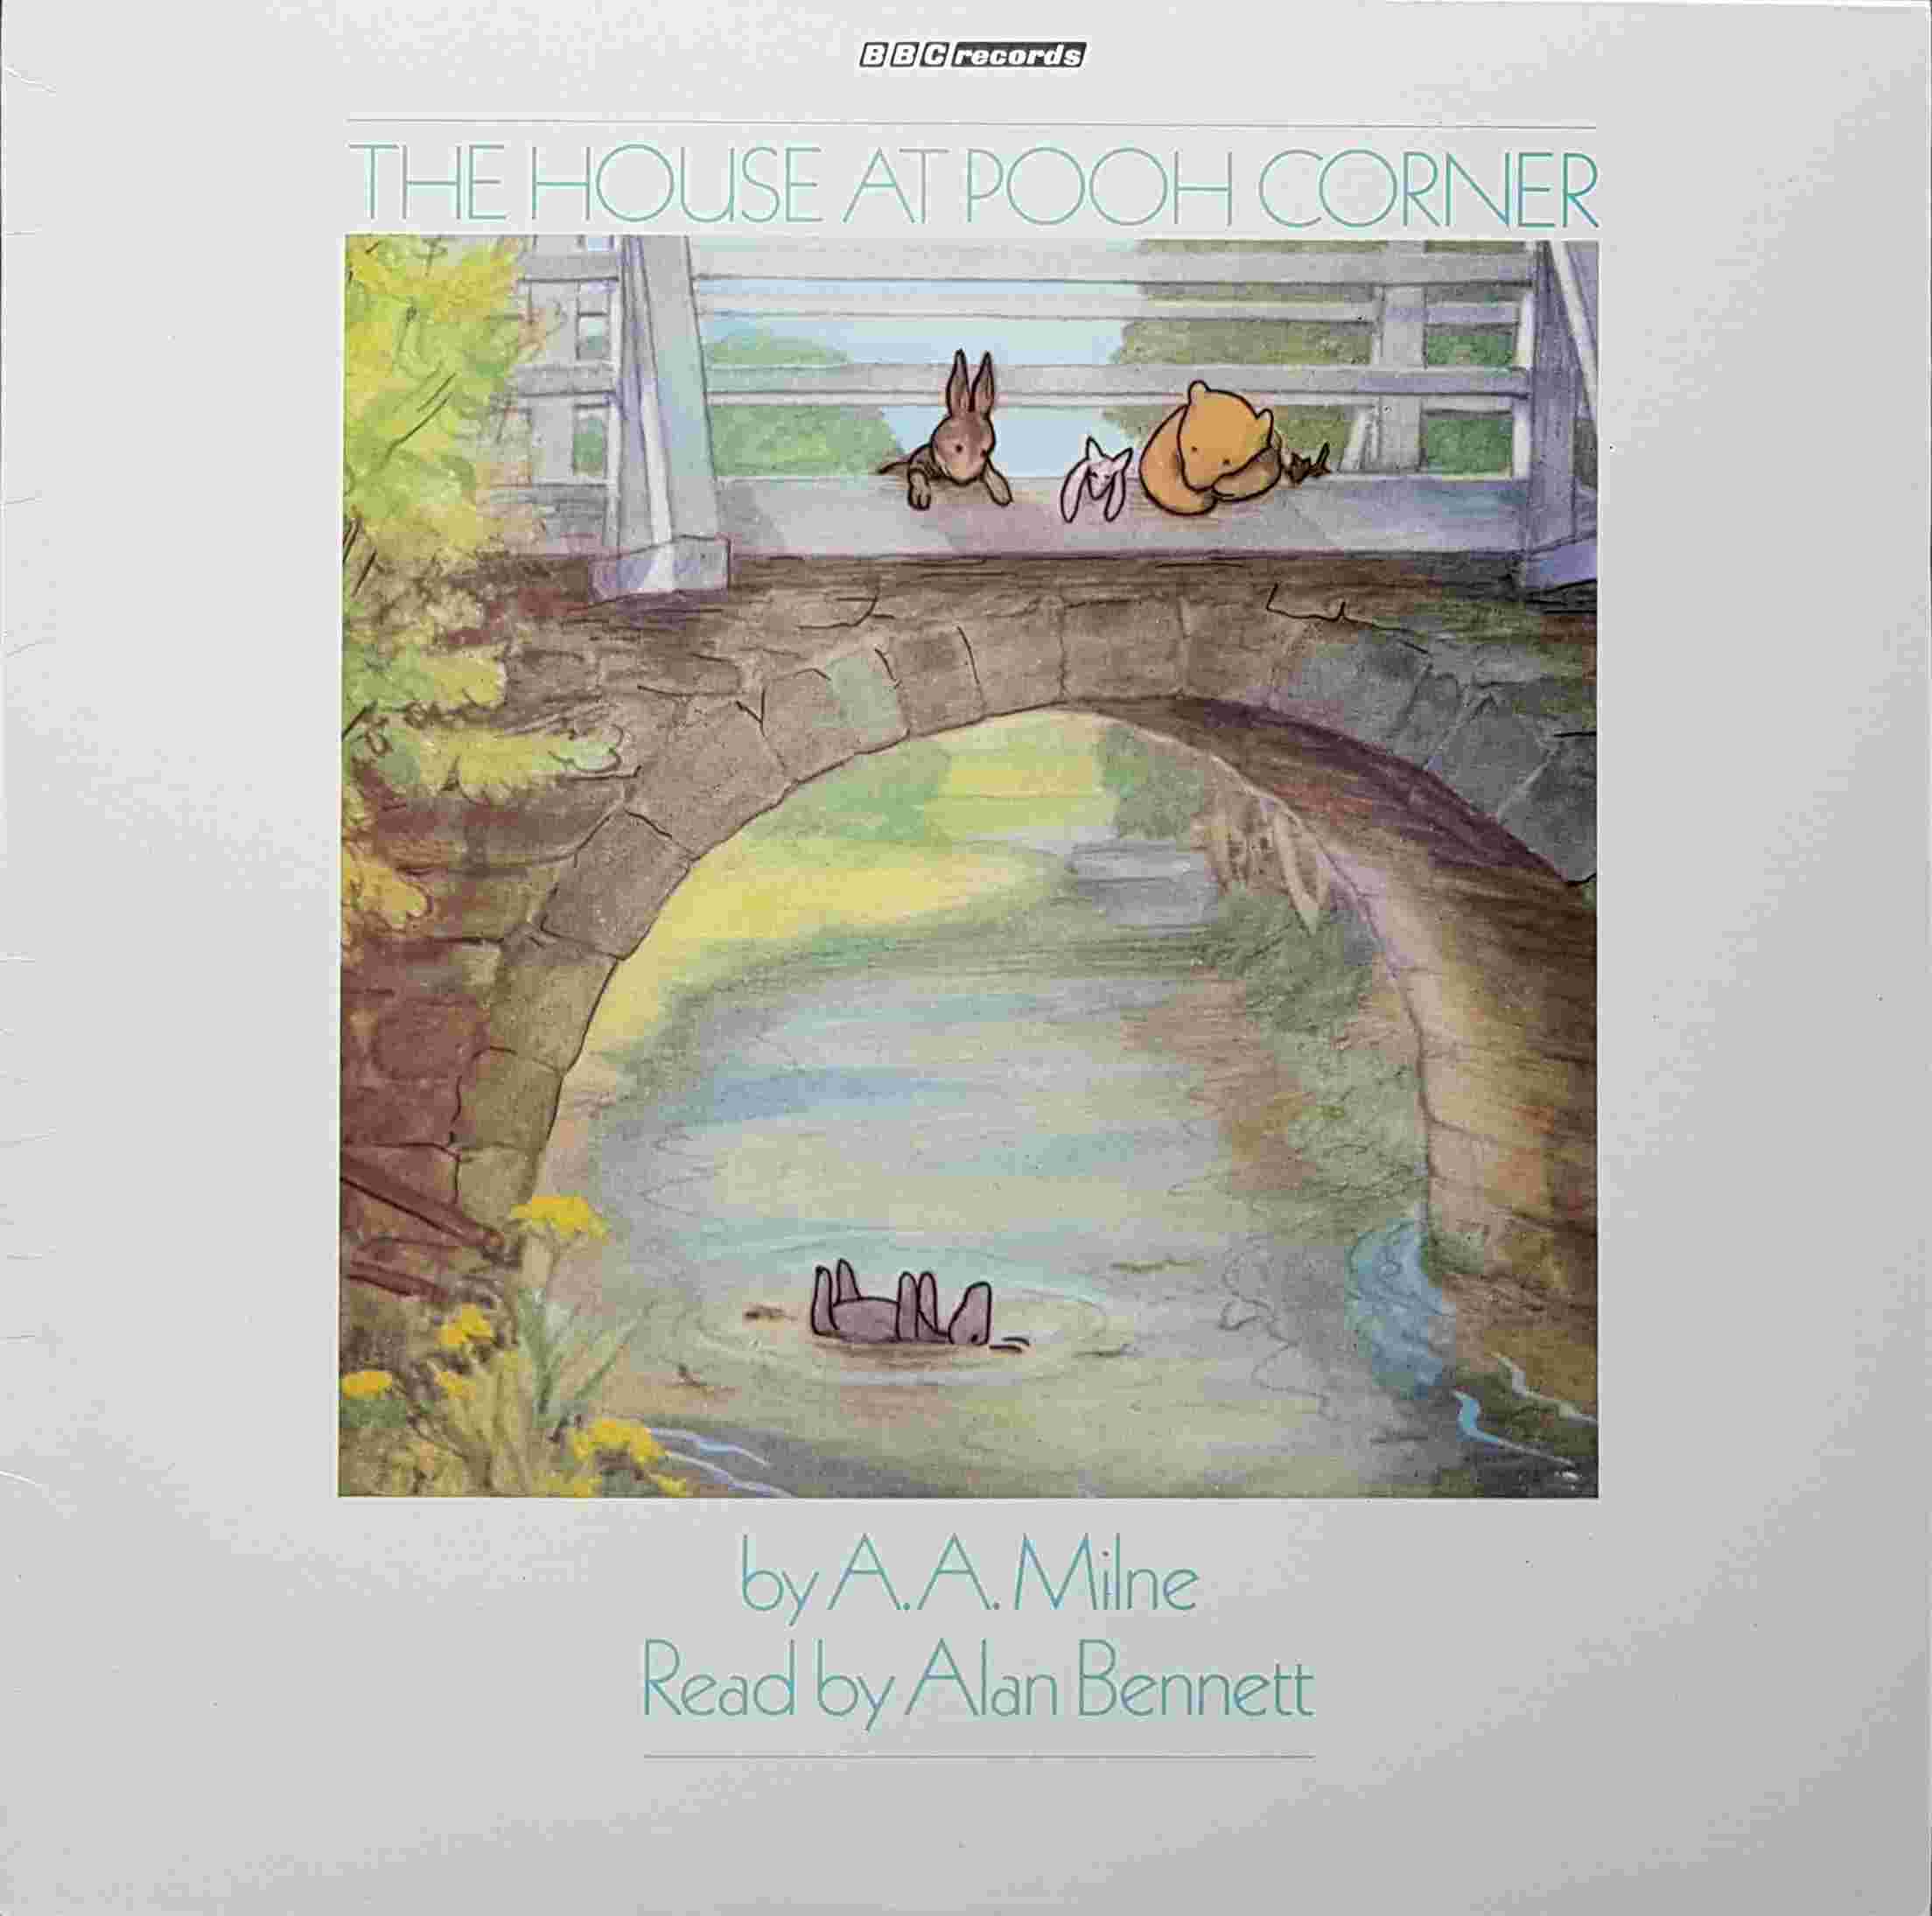 Picture of REC 493 The house at Pooh corner by artist A. A. Milne from the BBC albums - Records and Tapes library